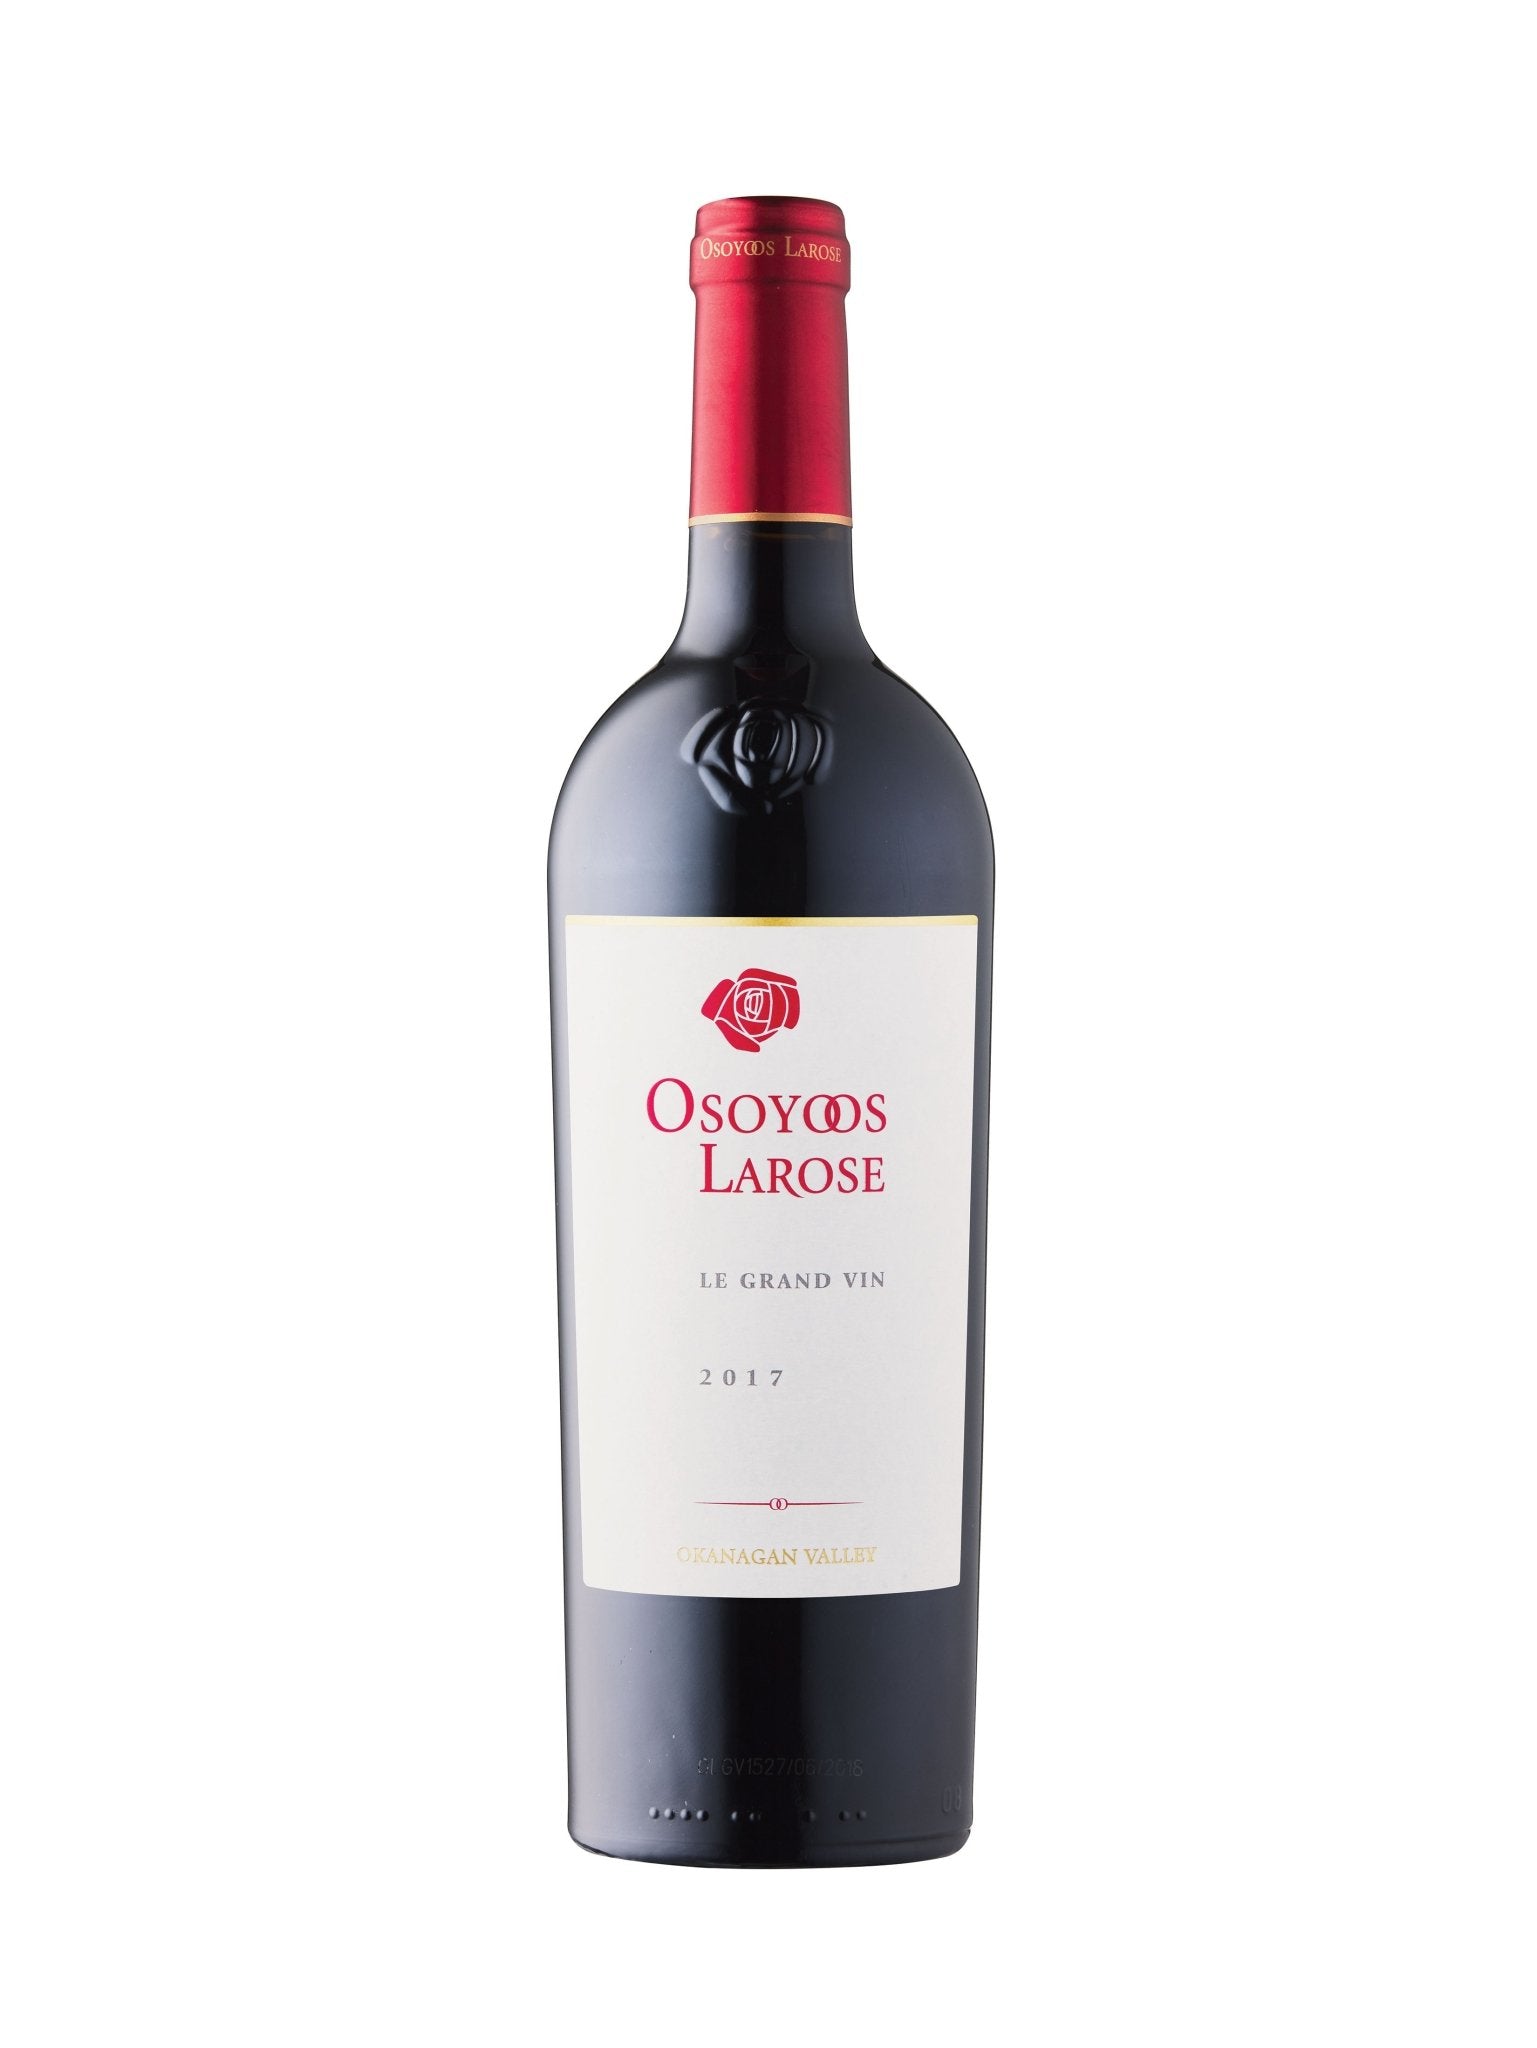 Osoyoos Larose Le Grand Vin | Exquisite Wine & Alcohol Gift Delivery Toronto Canada | Vyno